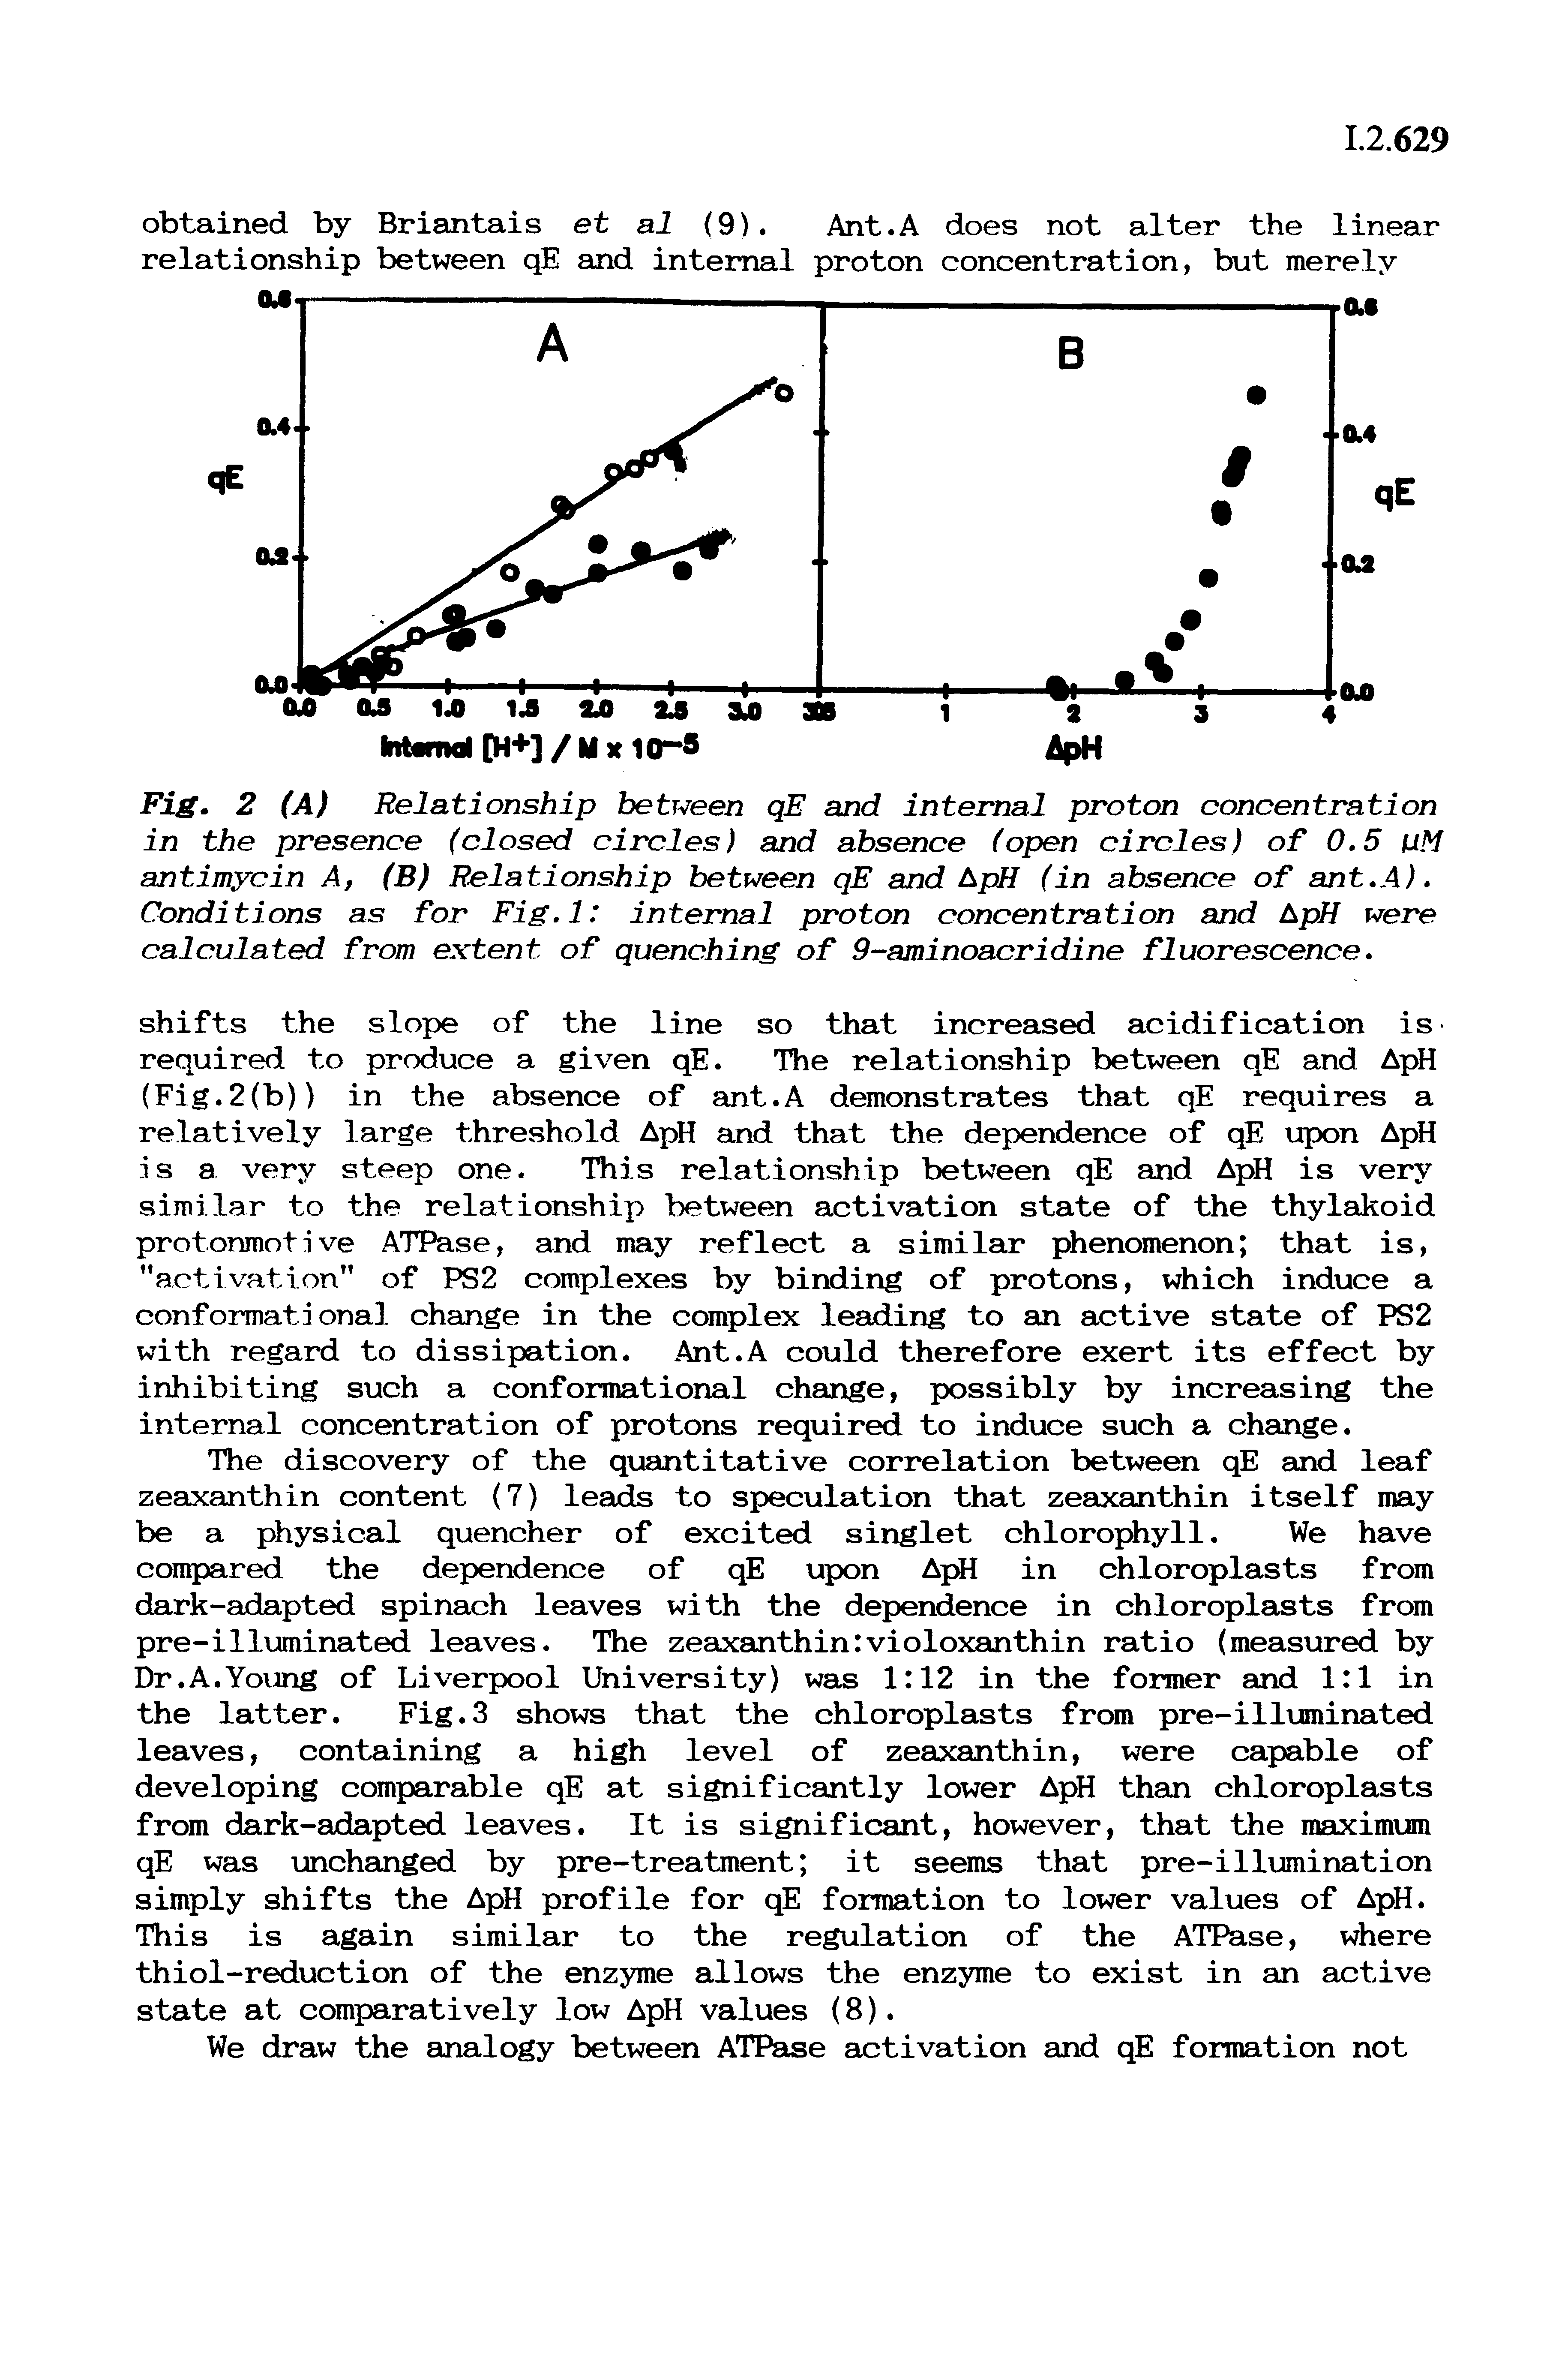 Fig. 2 (A) Relationship between qE and internal proton concentration in the presence (closed circles) and absence (open circles) of 0.5 uM antimycin A, (B) Relationship between qE and ApH (in absence of ant.A). Conditions as for Fig.l internal proton concentration and LpH were calculated from extent of quenching of 9-aminoacridine fluorescence.